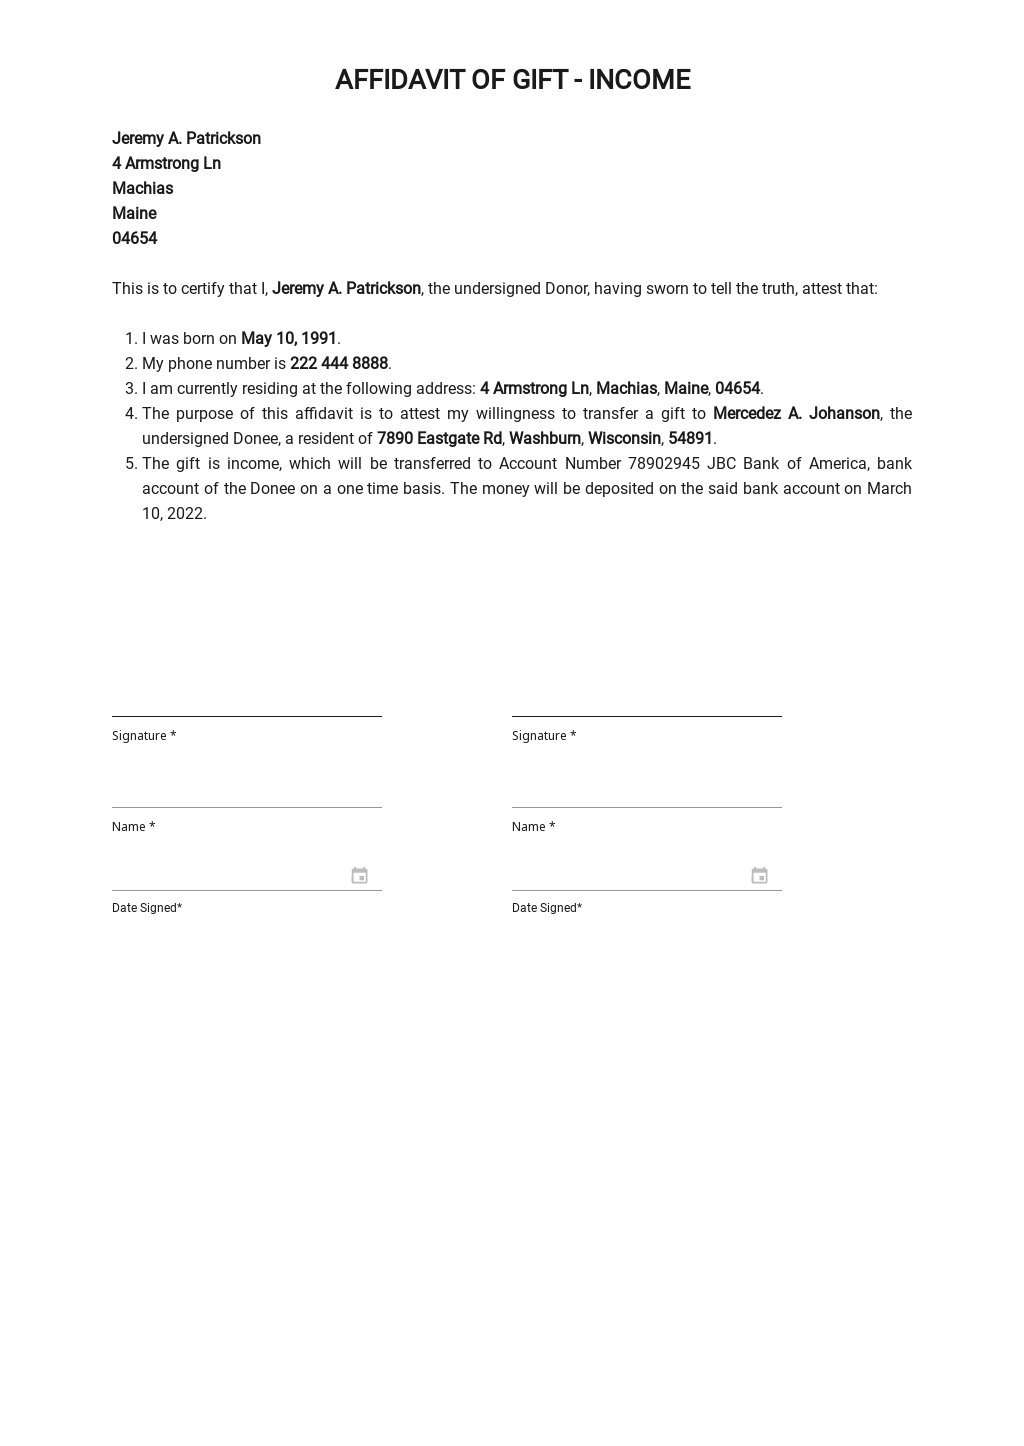 Affidavit of Gift ï¿½ Income Template in Word, Google Docs